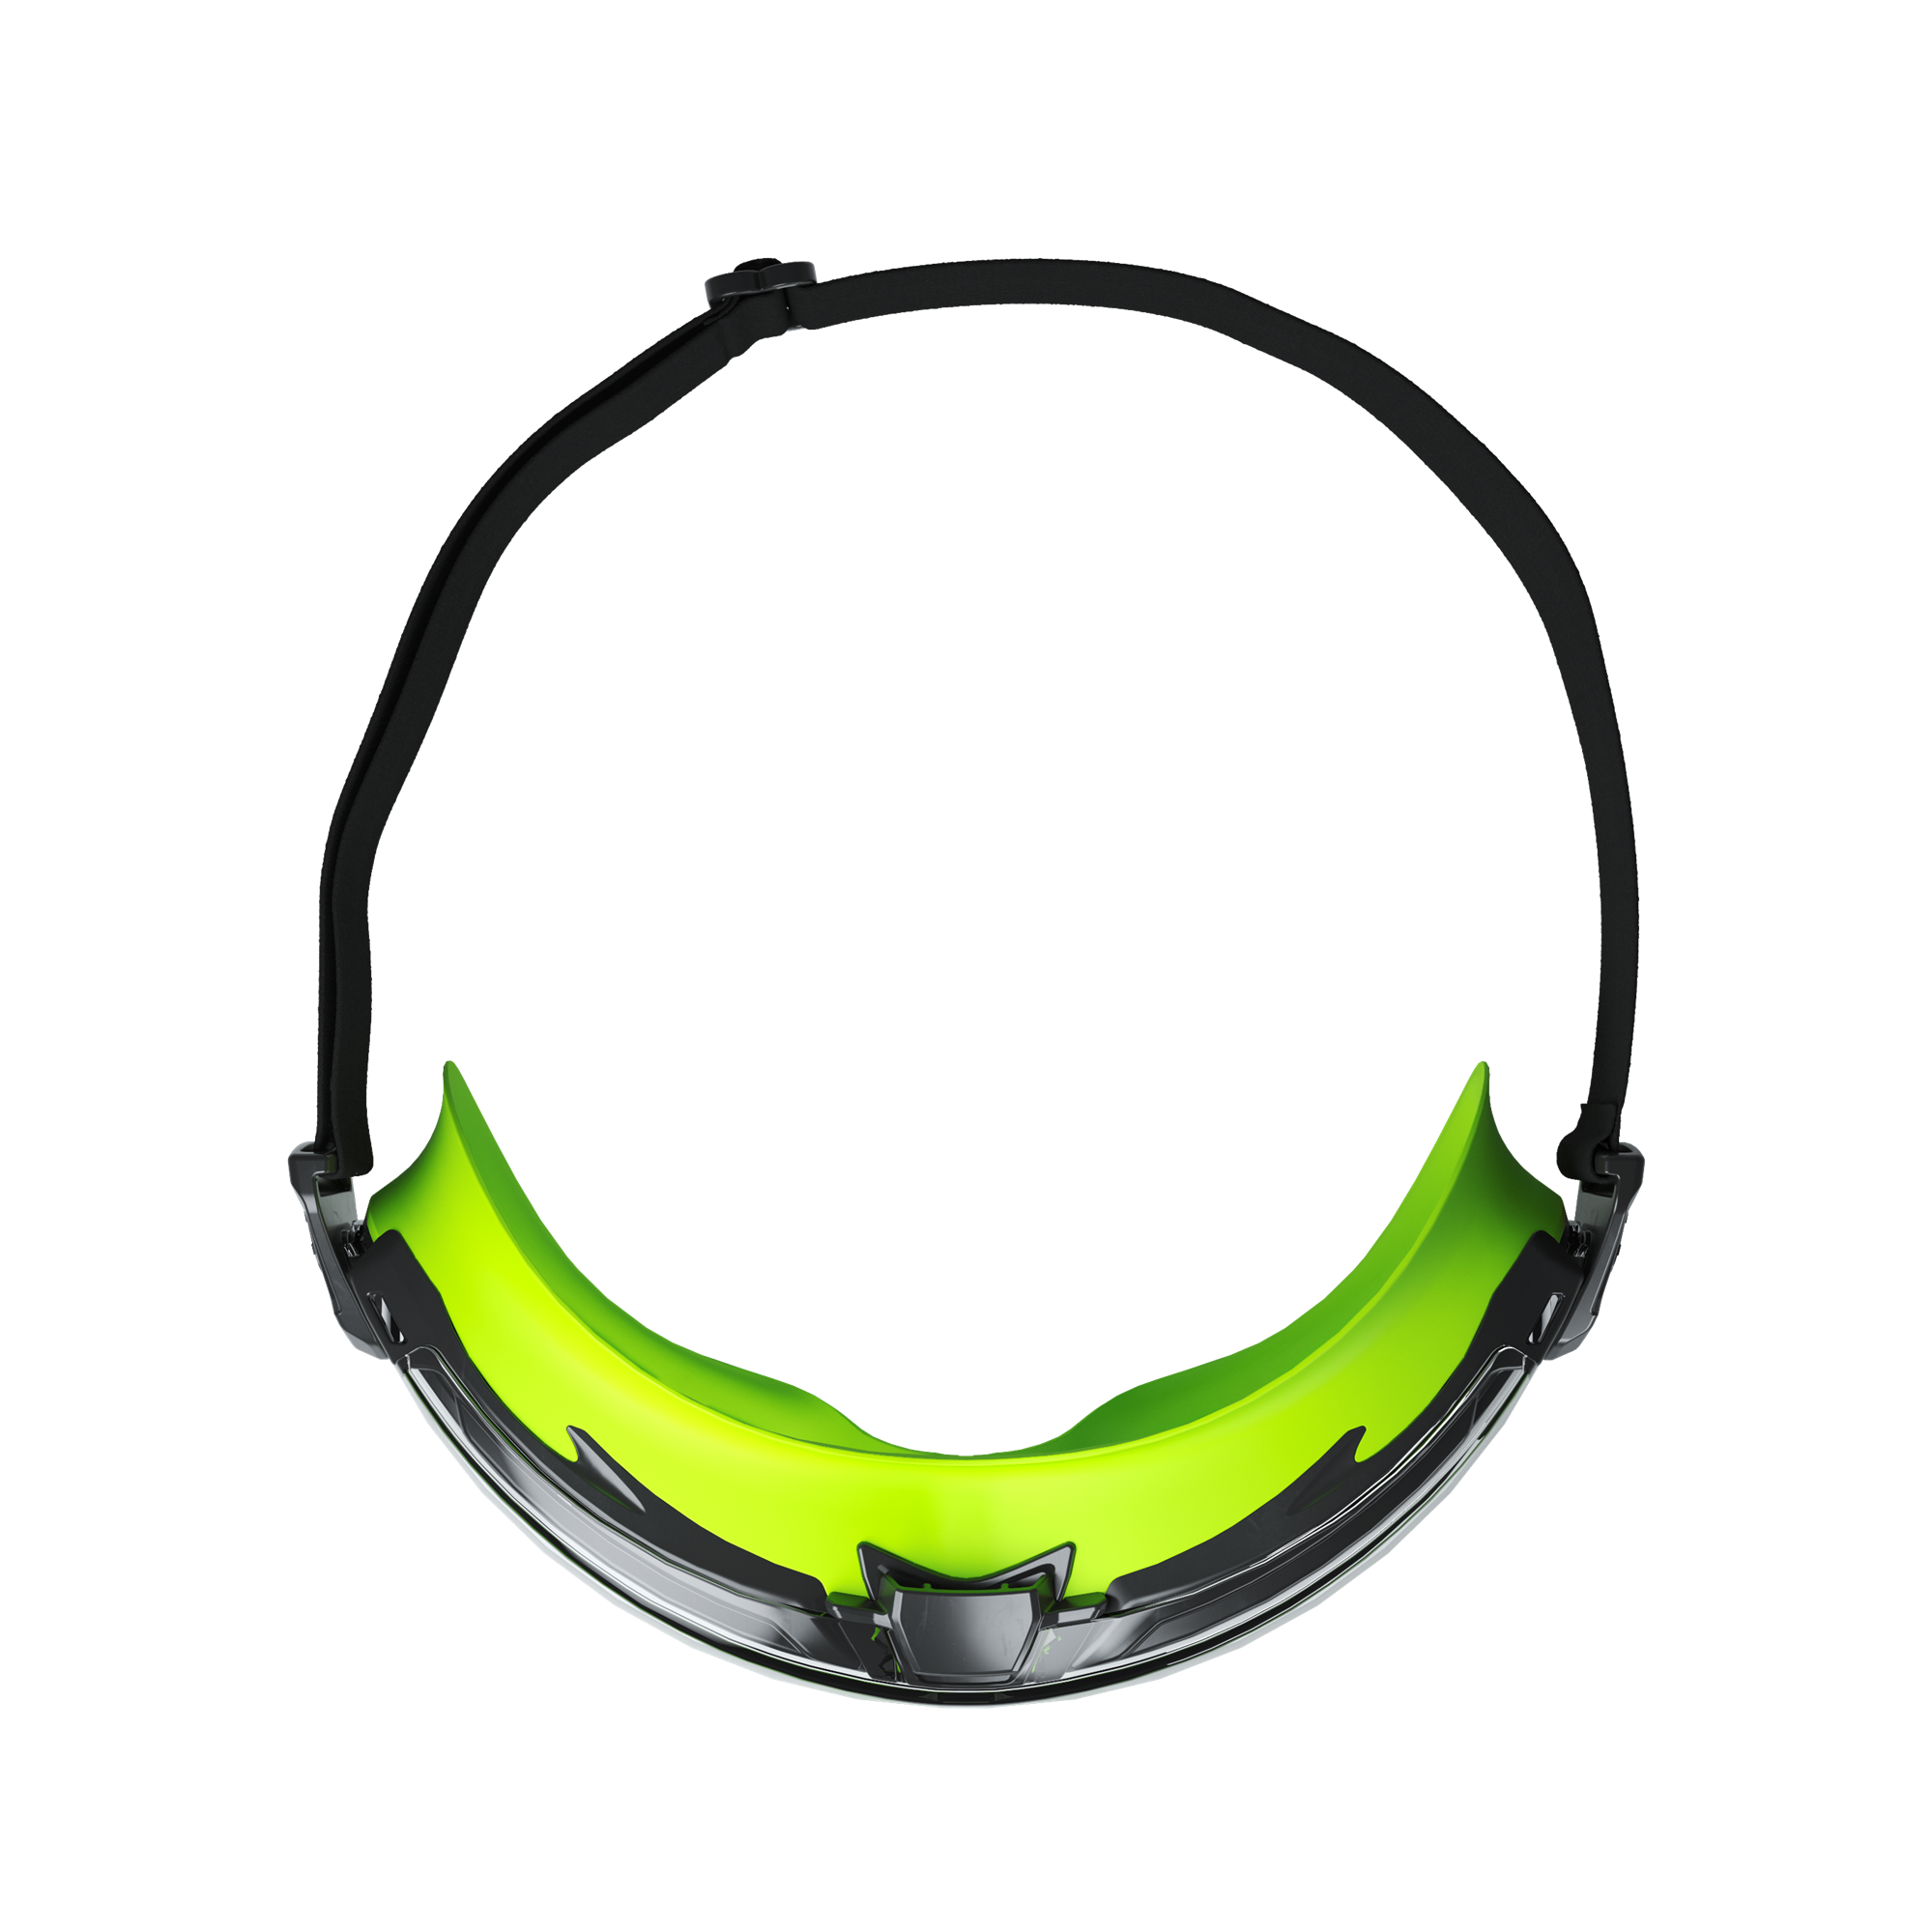 Hellberg Neon Plus Clear AF/AS Endurance Safety Goggles